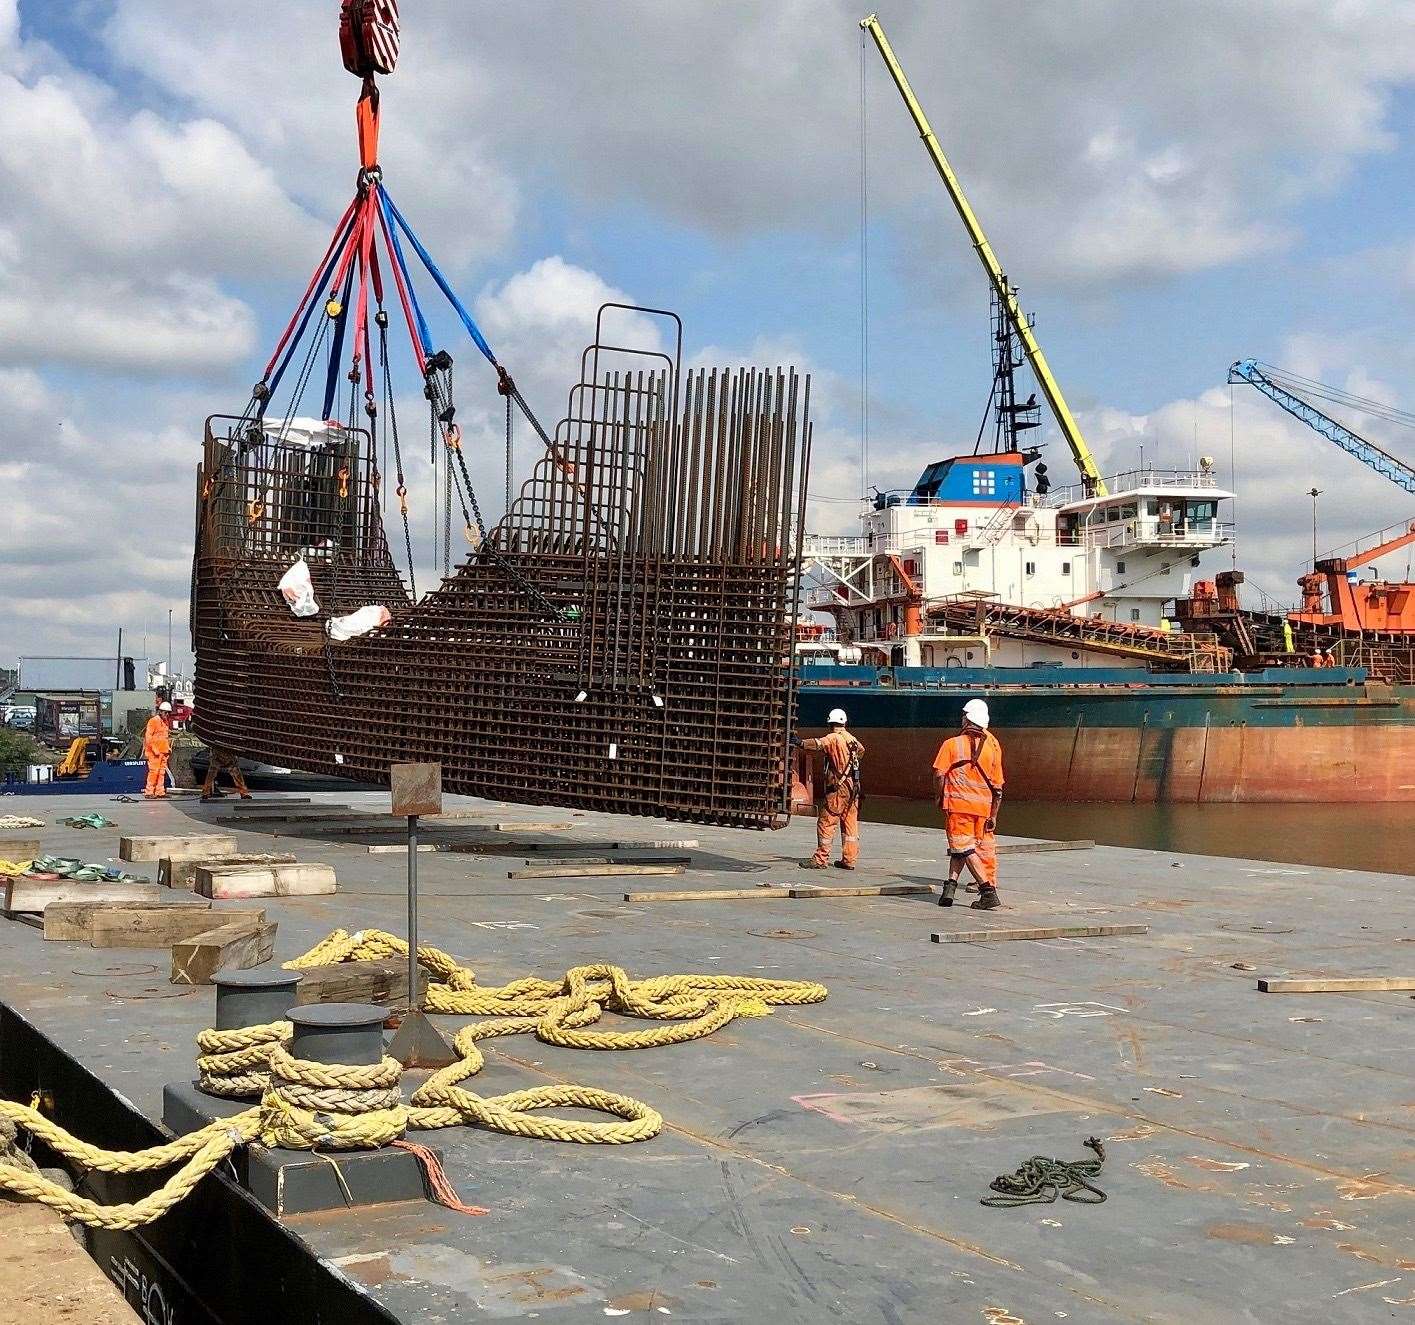 Chatham Docks is set for closure in 2025 as leases expire and landowners Peel L&P say they will not be renewed but there is a campaign to protect the jobs there. Picture: Save Chatham Docks